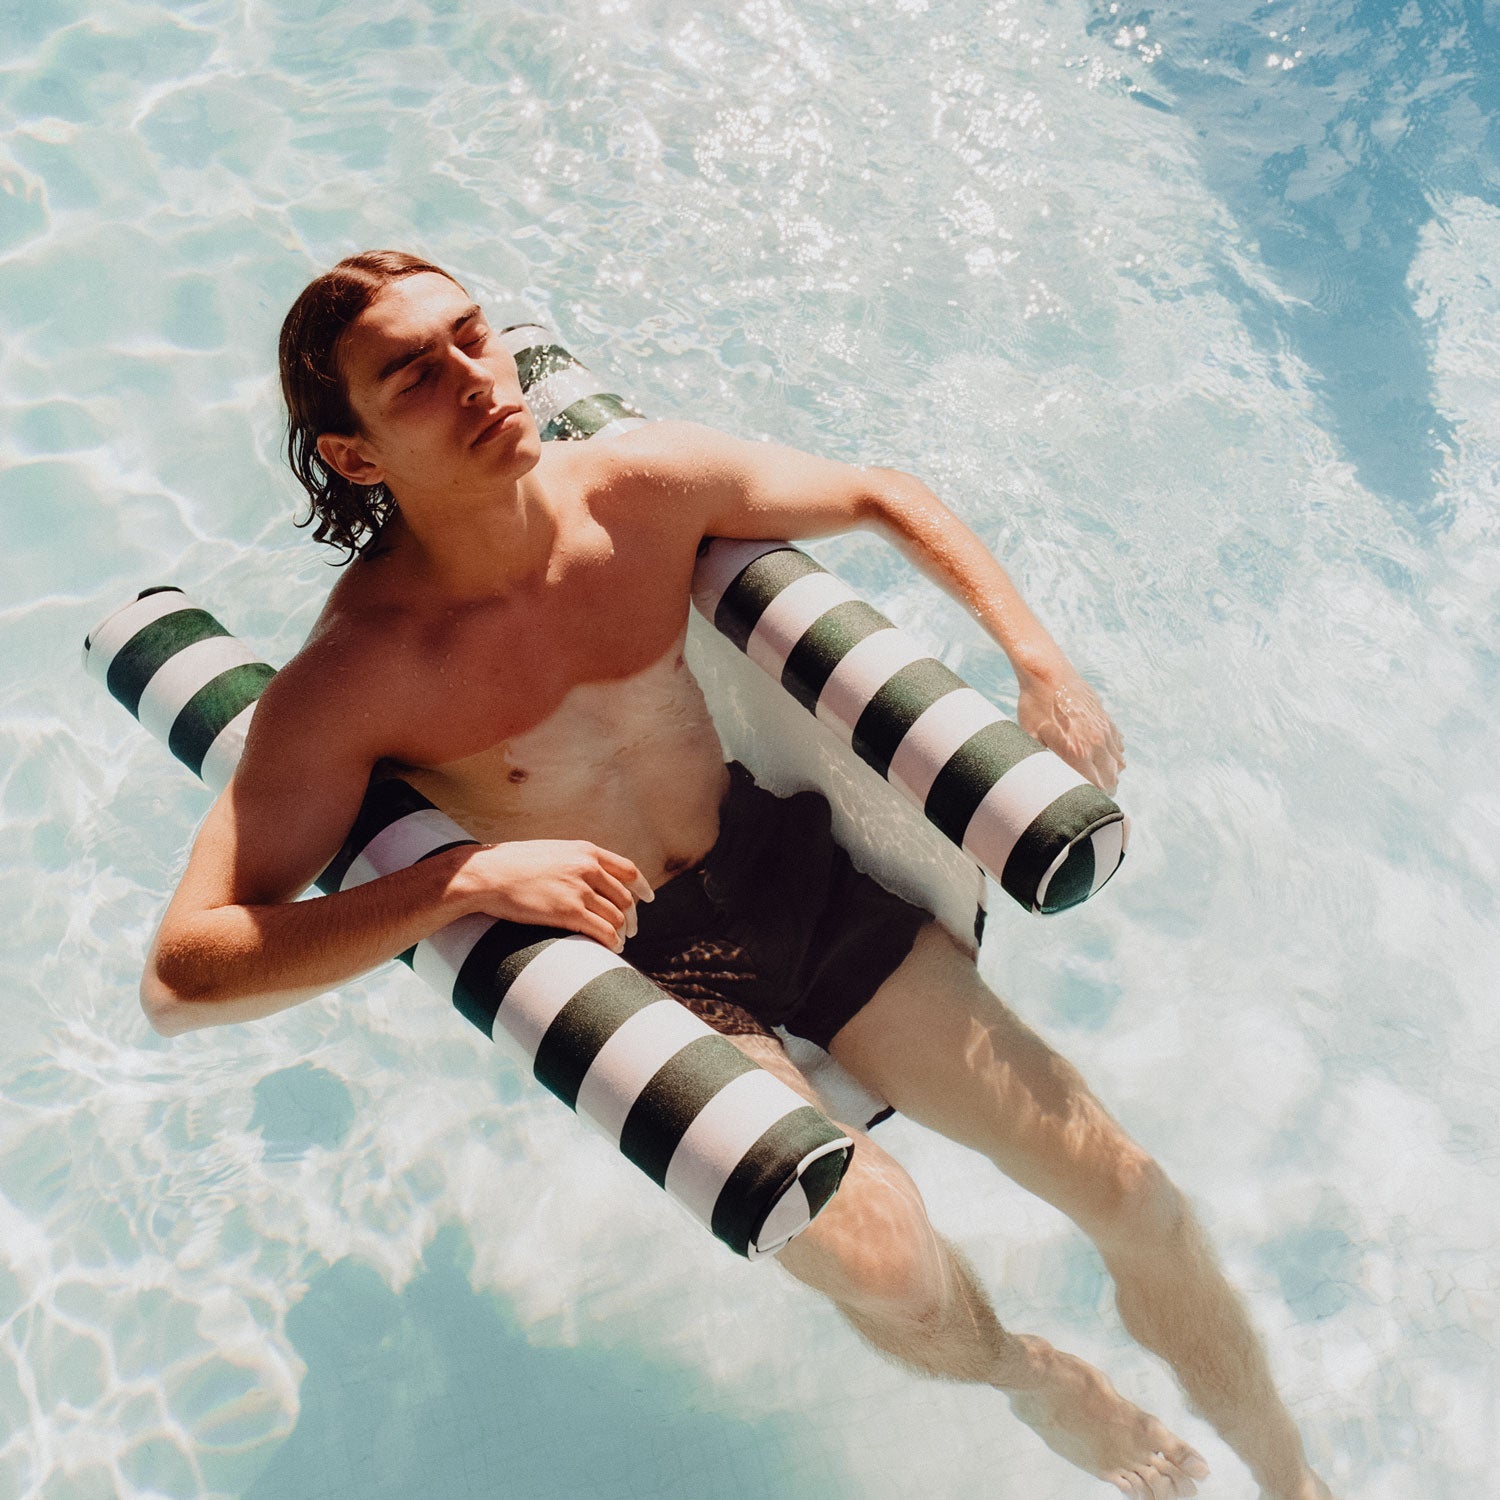 A man sitting on a pool toy for adults in a swimming pool.